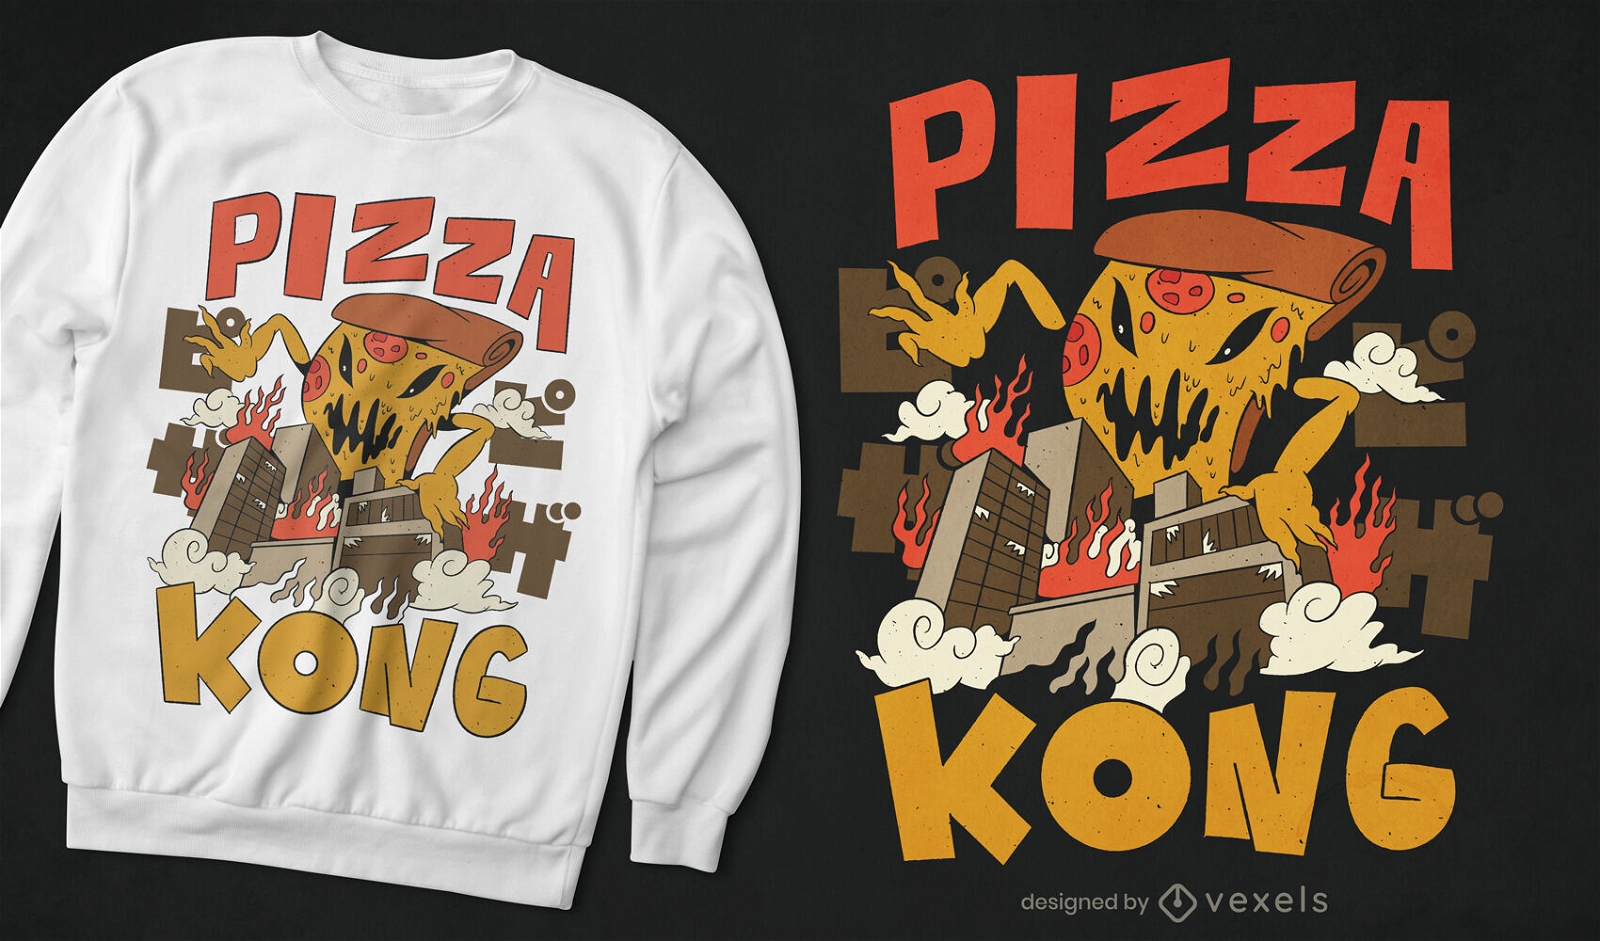 Pizza monster attacking city t-shirt design